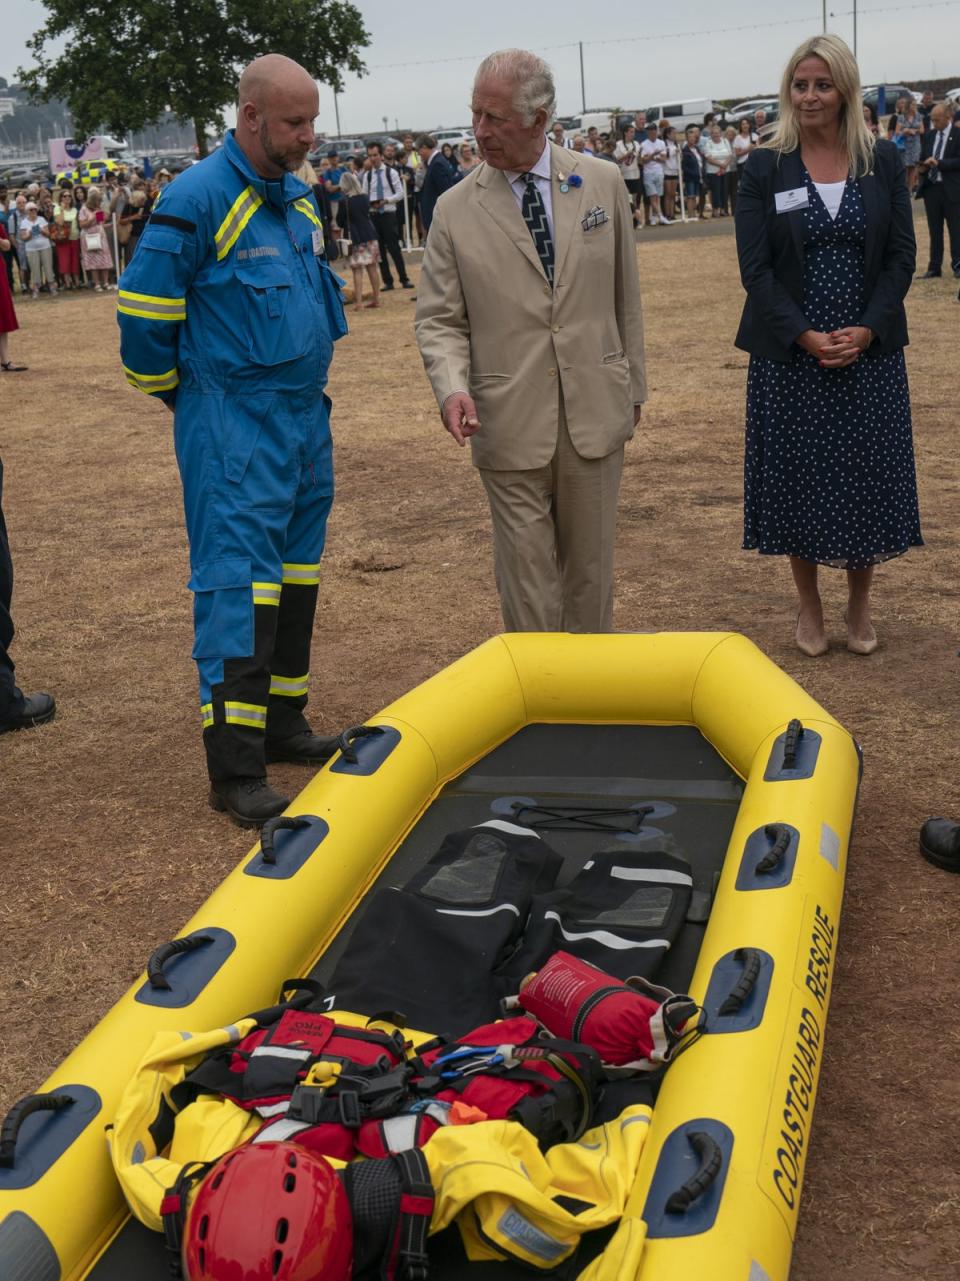 Charles was shown some of the equipment used by Coastguard volunteers (Arthur Edwards/The Sun/PA) (PA Wire)